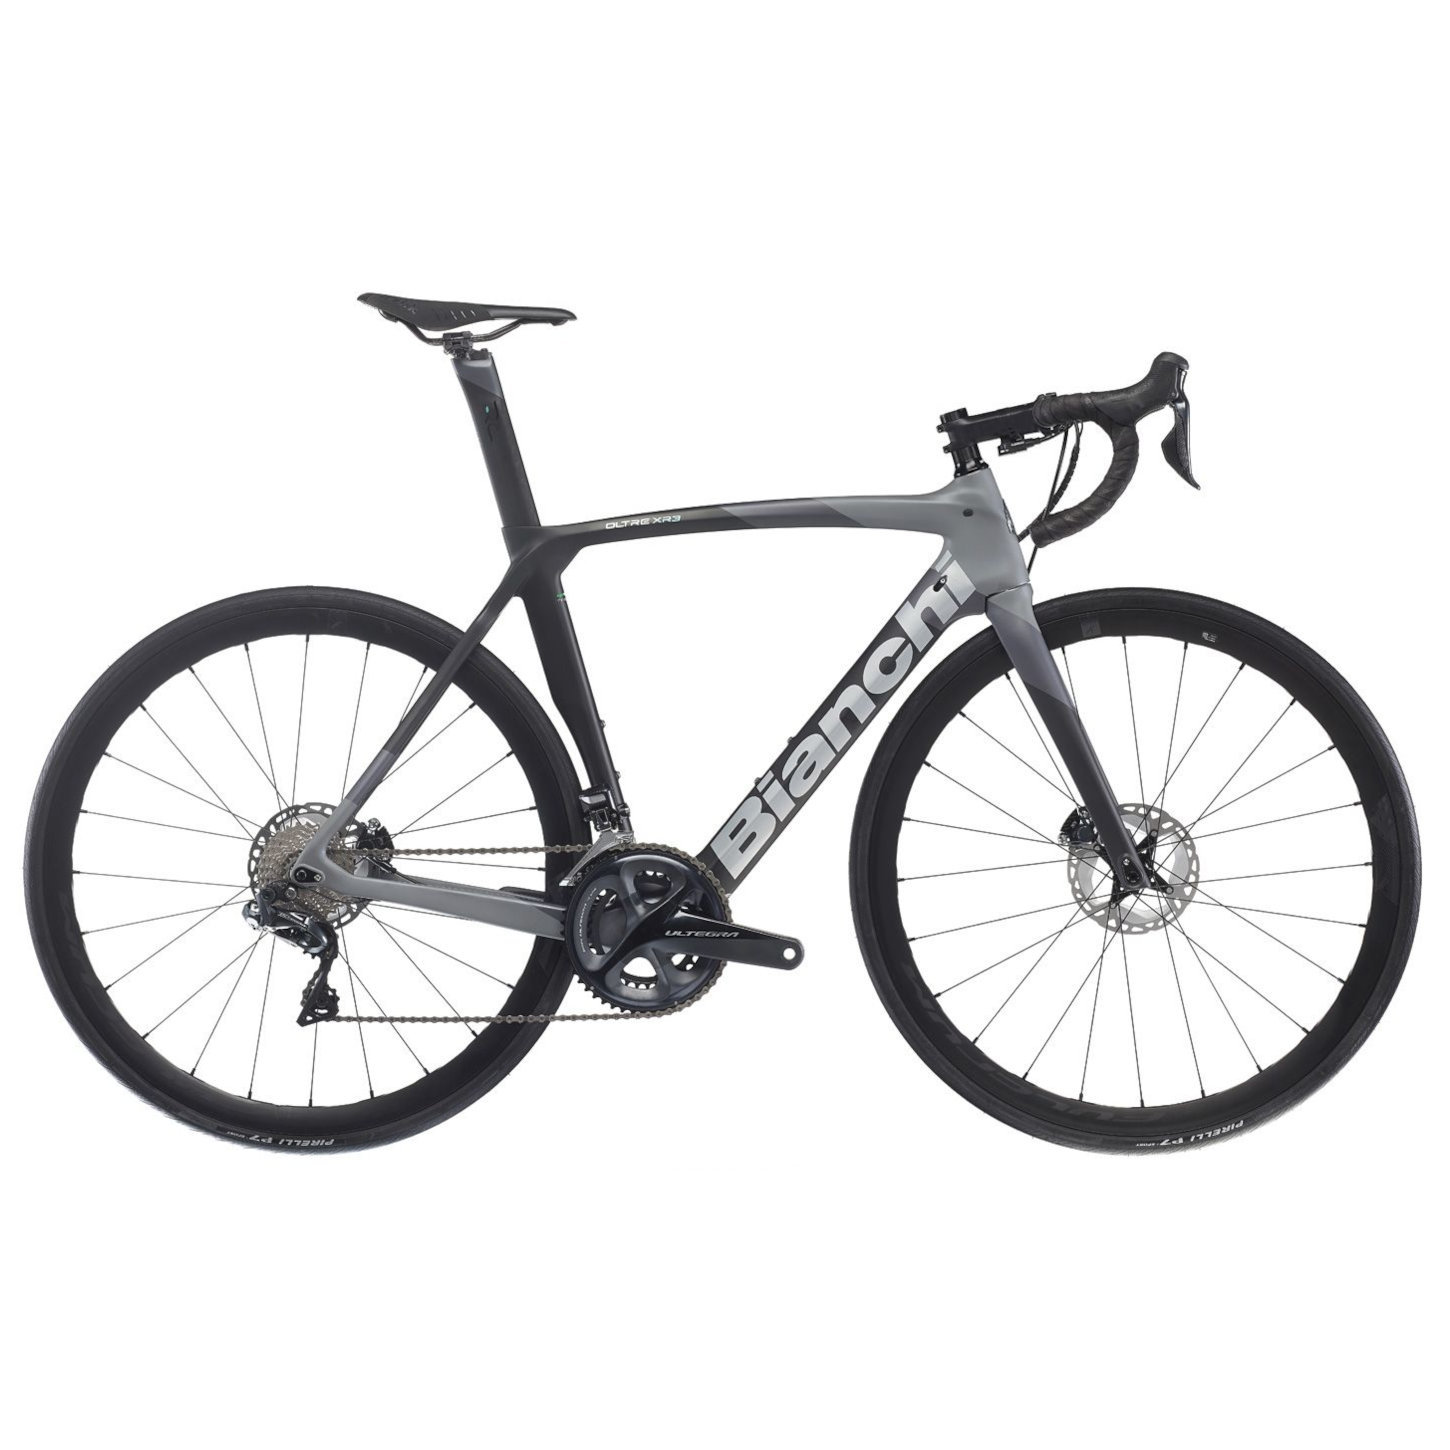 Picture of Bianchi OLTRE XR3 Disc - Ultegra - Carbon Roadbike - 2023 - graphite / grey shade / metal mirror